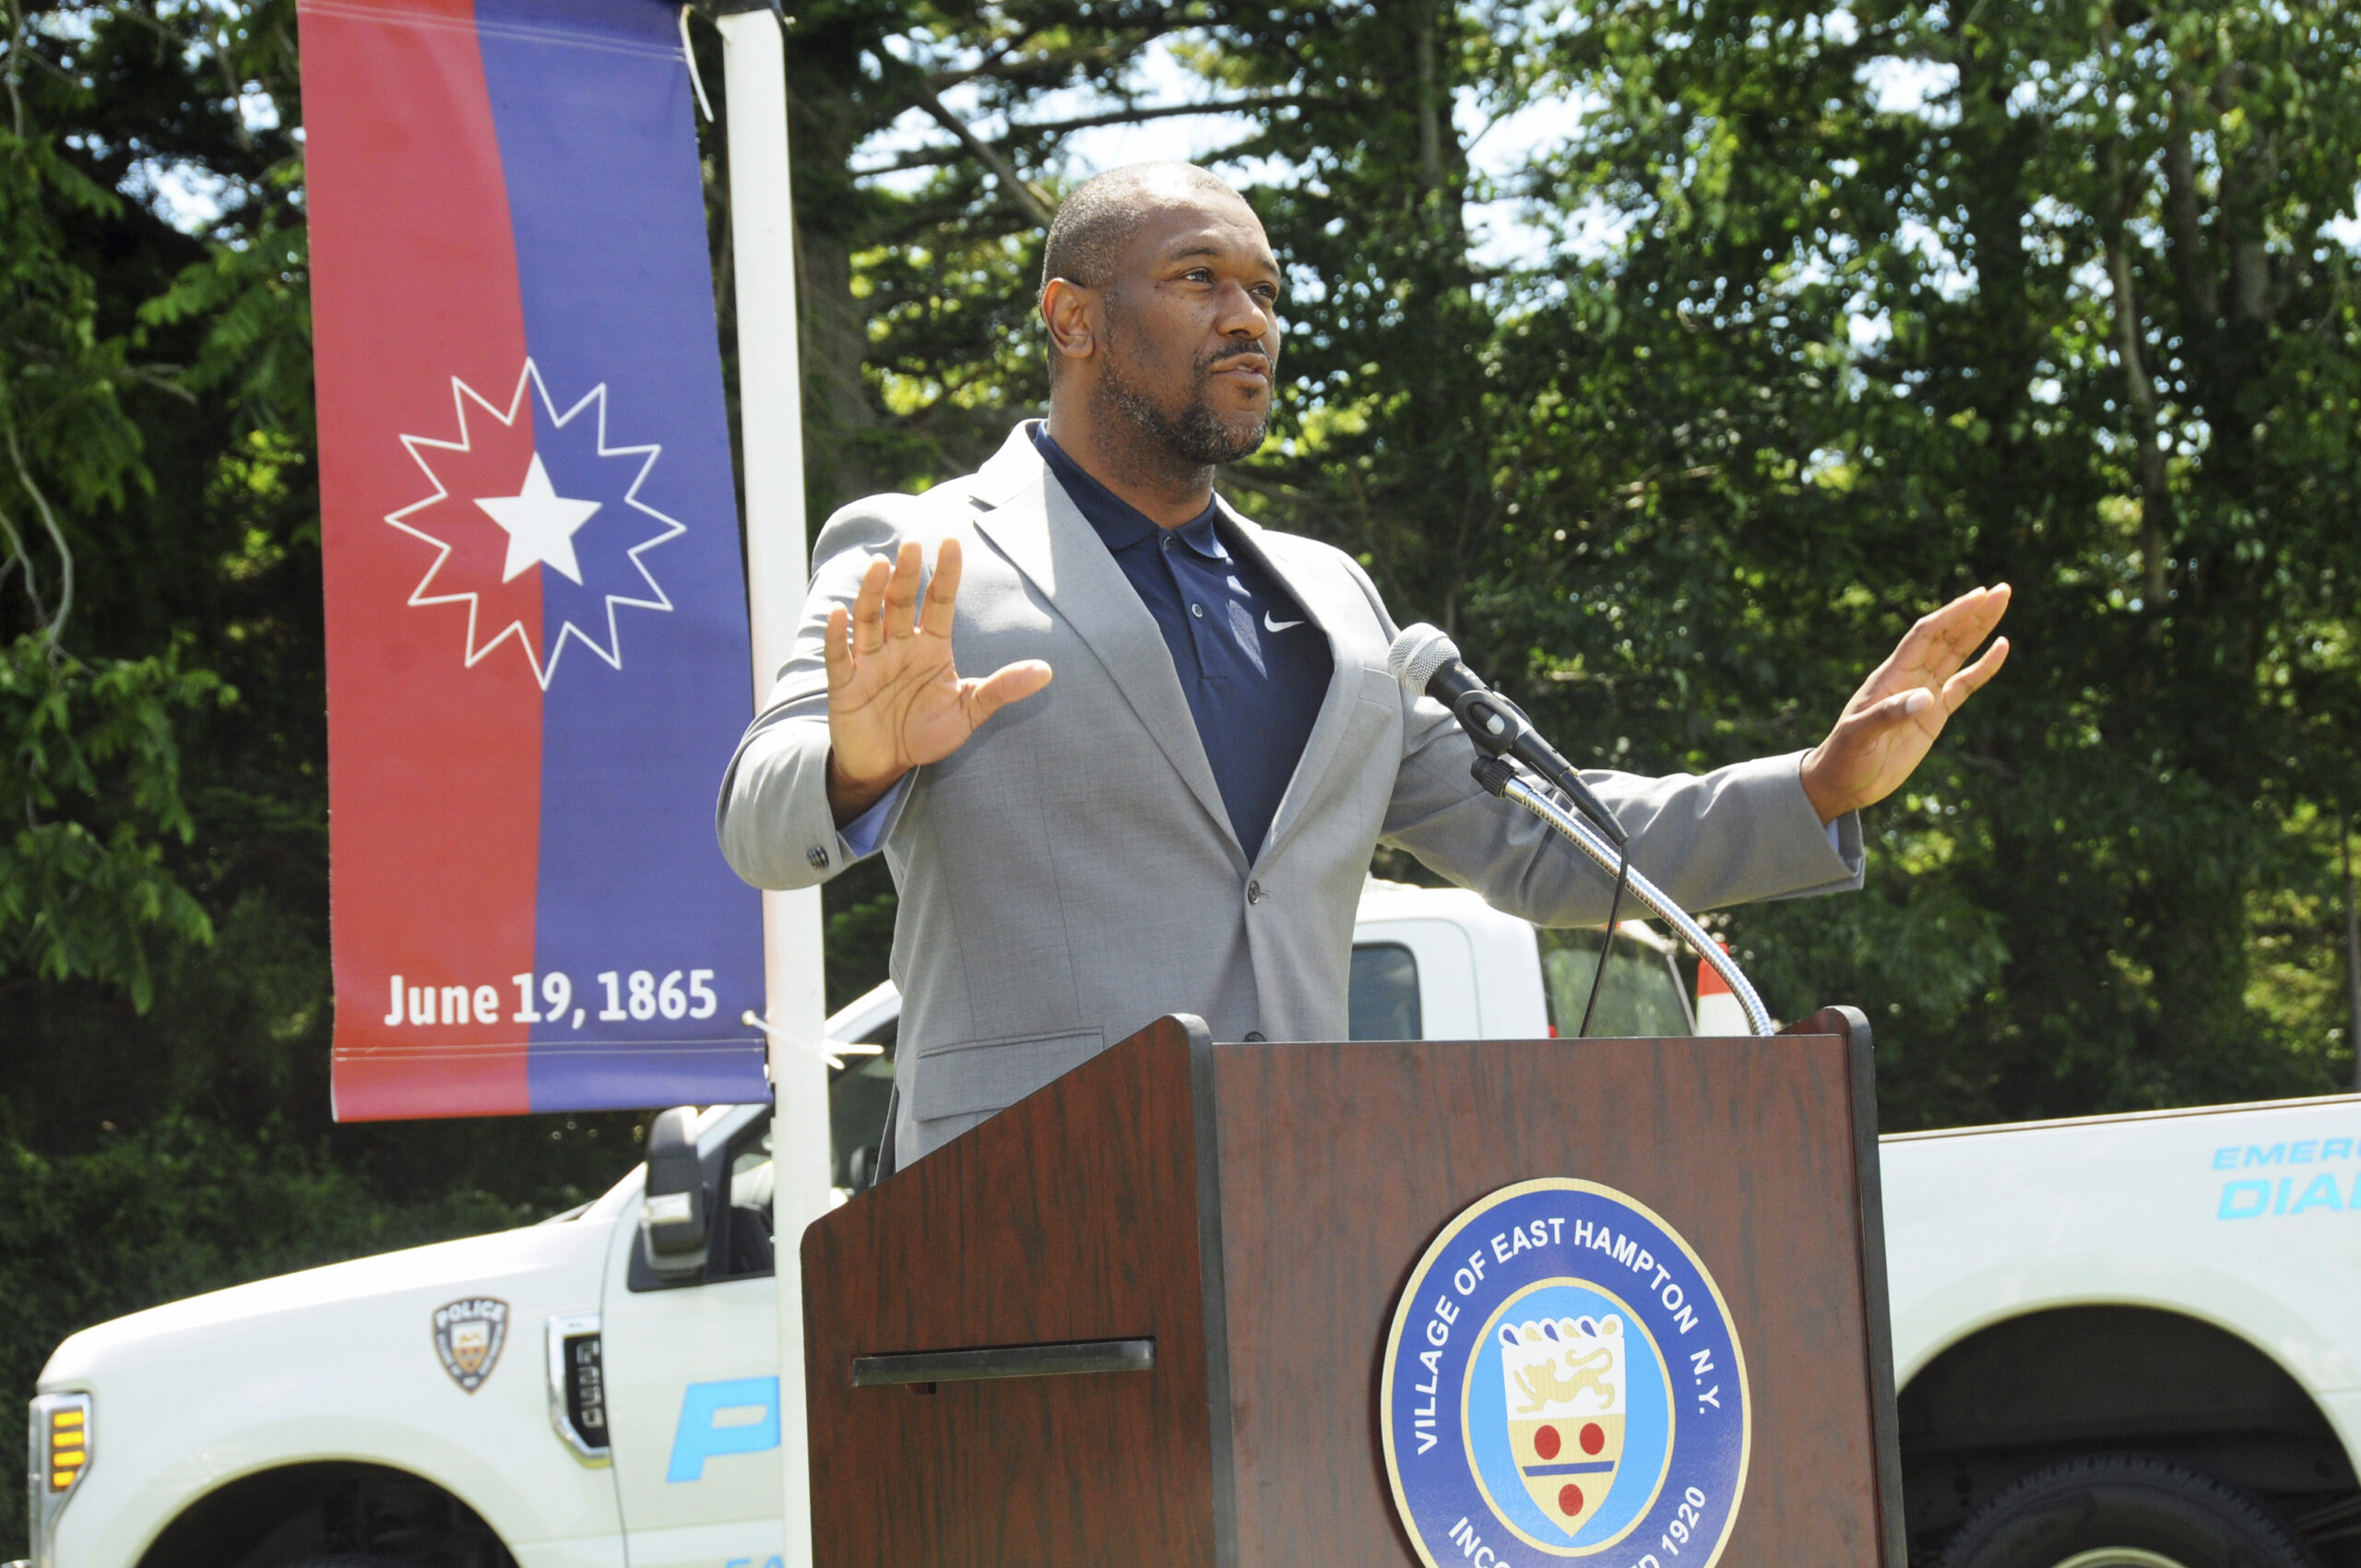 The Reverend Dr. Lewis Brogdon, associate professor and director of the Institute for Black Church Studies at the Baptist Seminary in Louisville, KY, gives the keynote speech at East Hampton Village's Juneteenth celebration in Herrick Park on Sunday.   RICHARD LEWIN